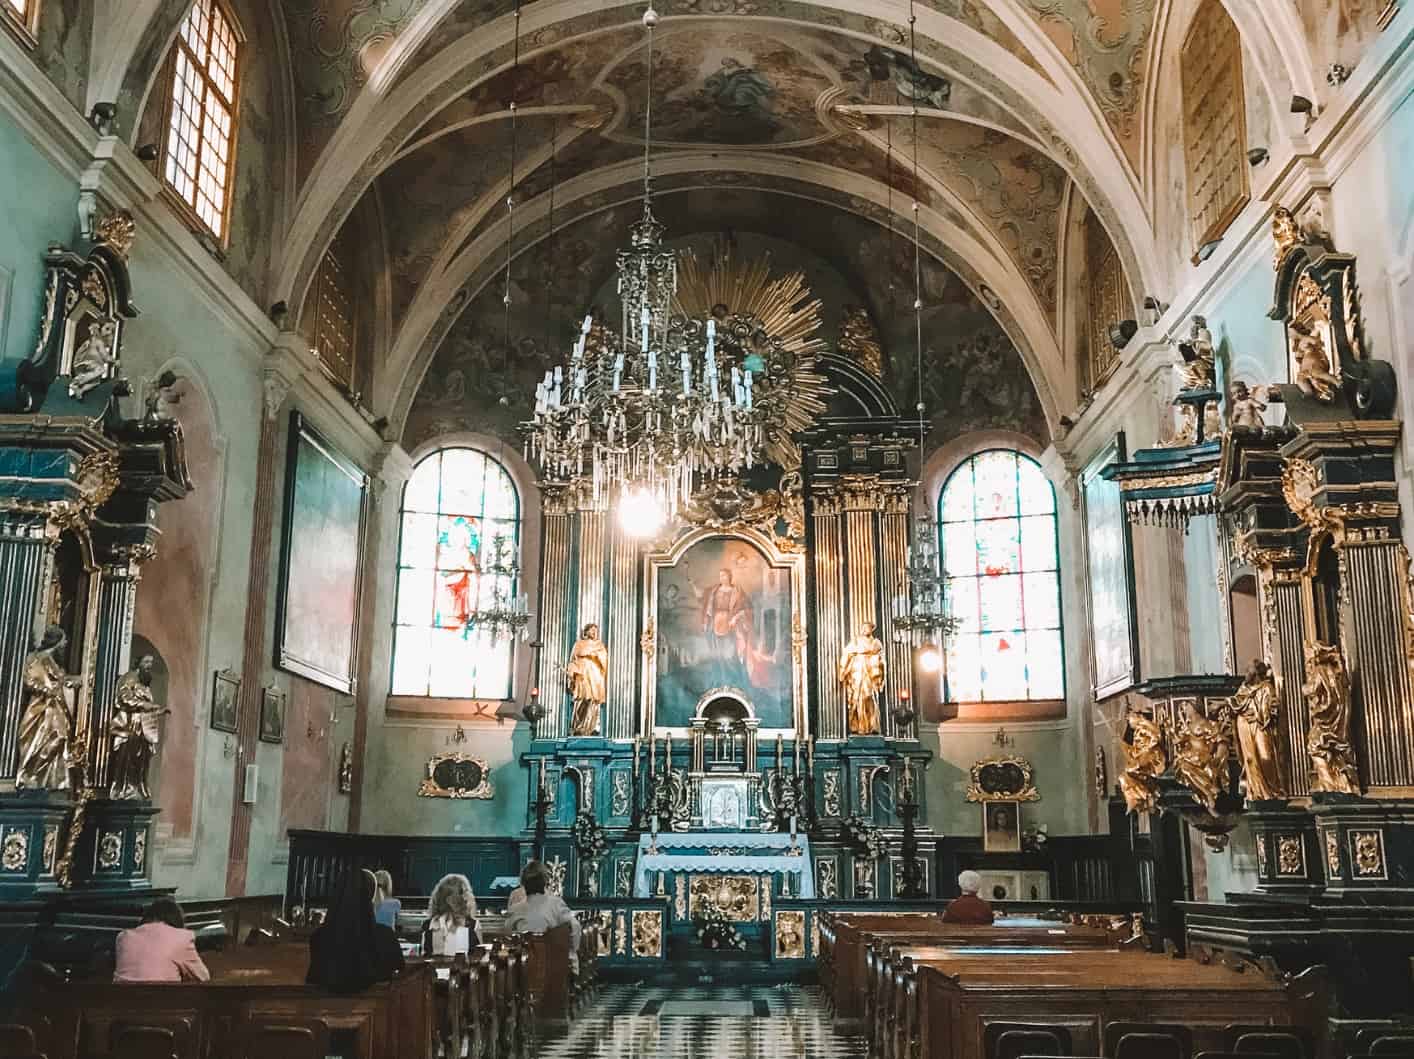 The ornate interior of the Church of St. Barbara